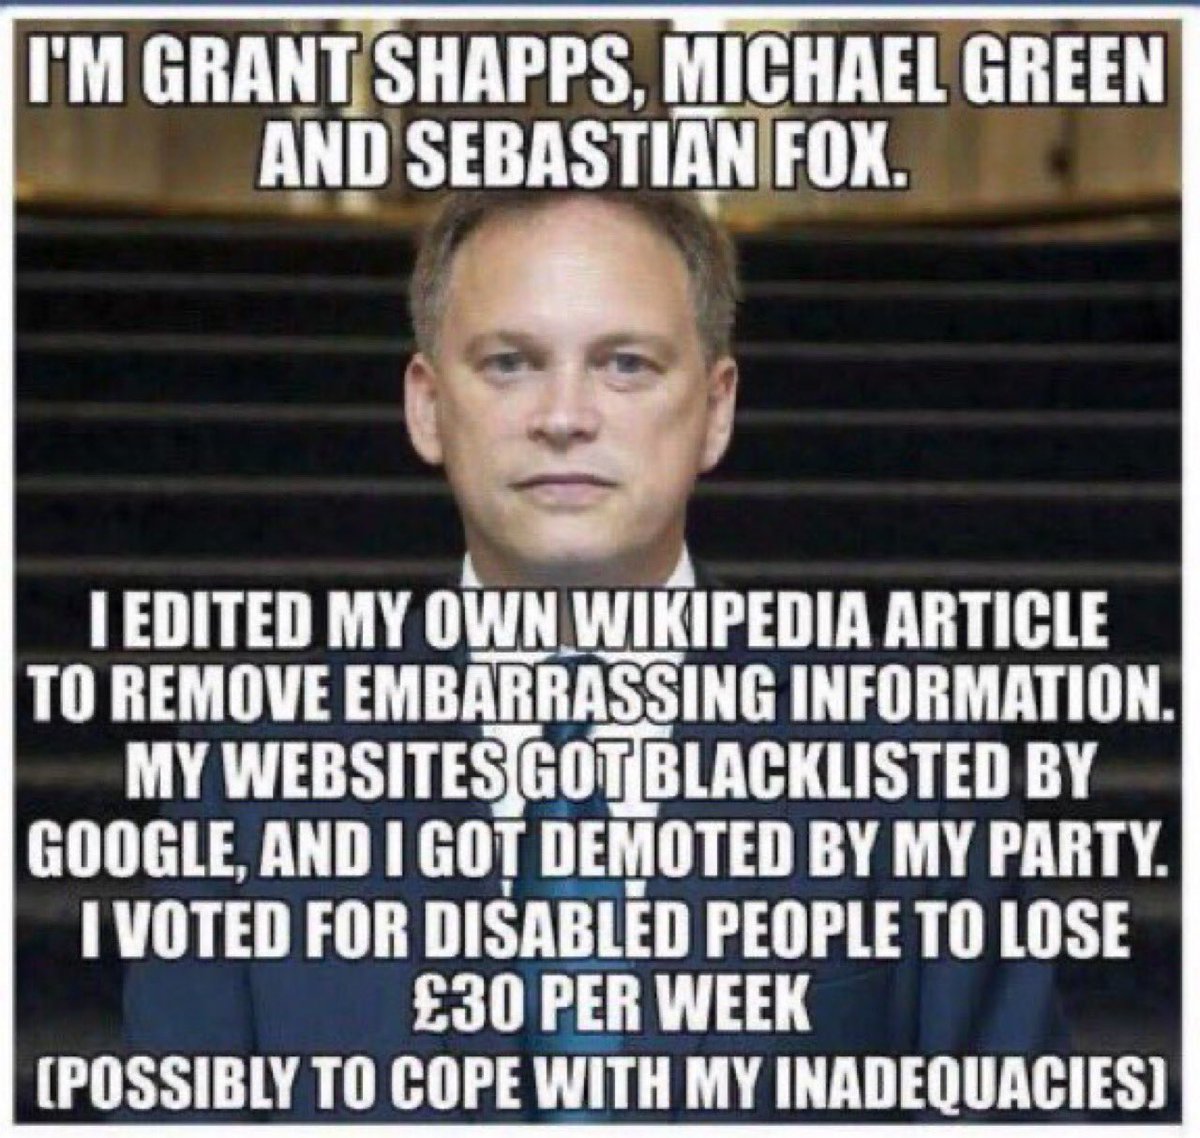 Grunt Shatts, Michael Green, Sebastian Fox and Corinne Stockheath appointed as Defence Secretary… when the Tory barrel has been so well and truly scraped that you’ve gone through the bottom and reached the toxic medieval cesspit festering far beneath. 
#GrantShapps #ToryShyster